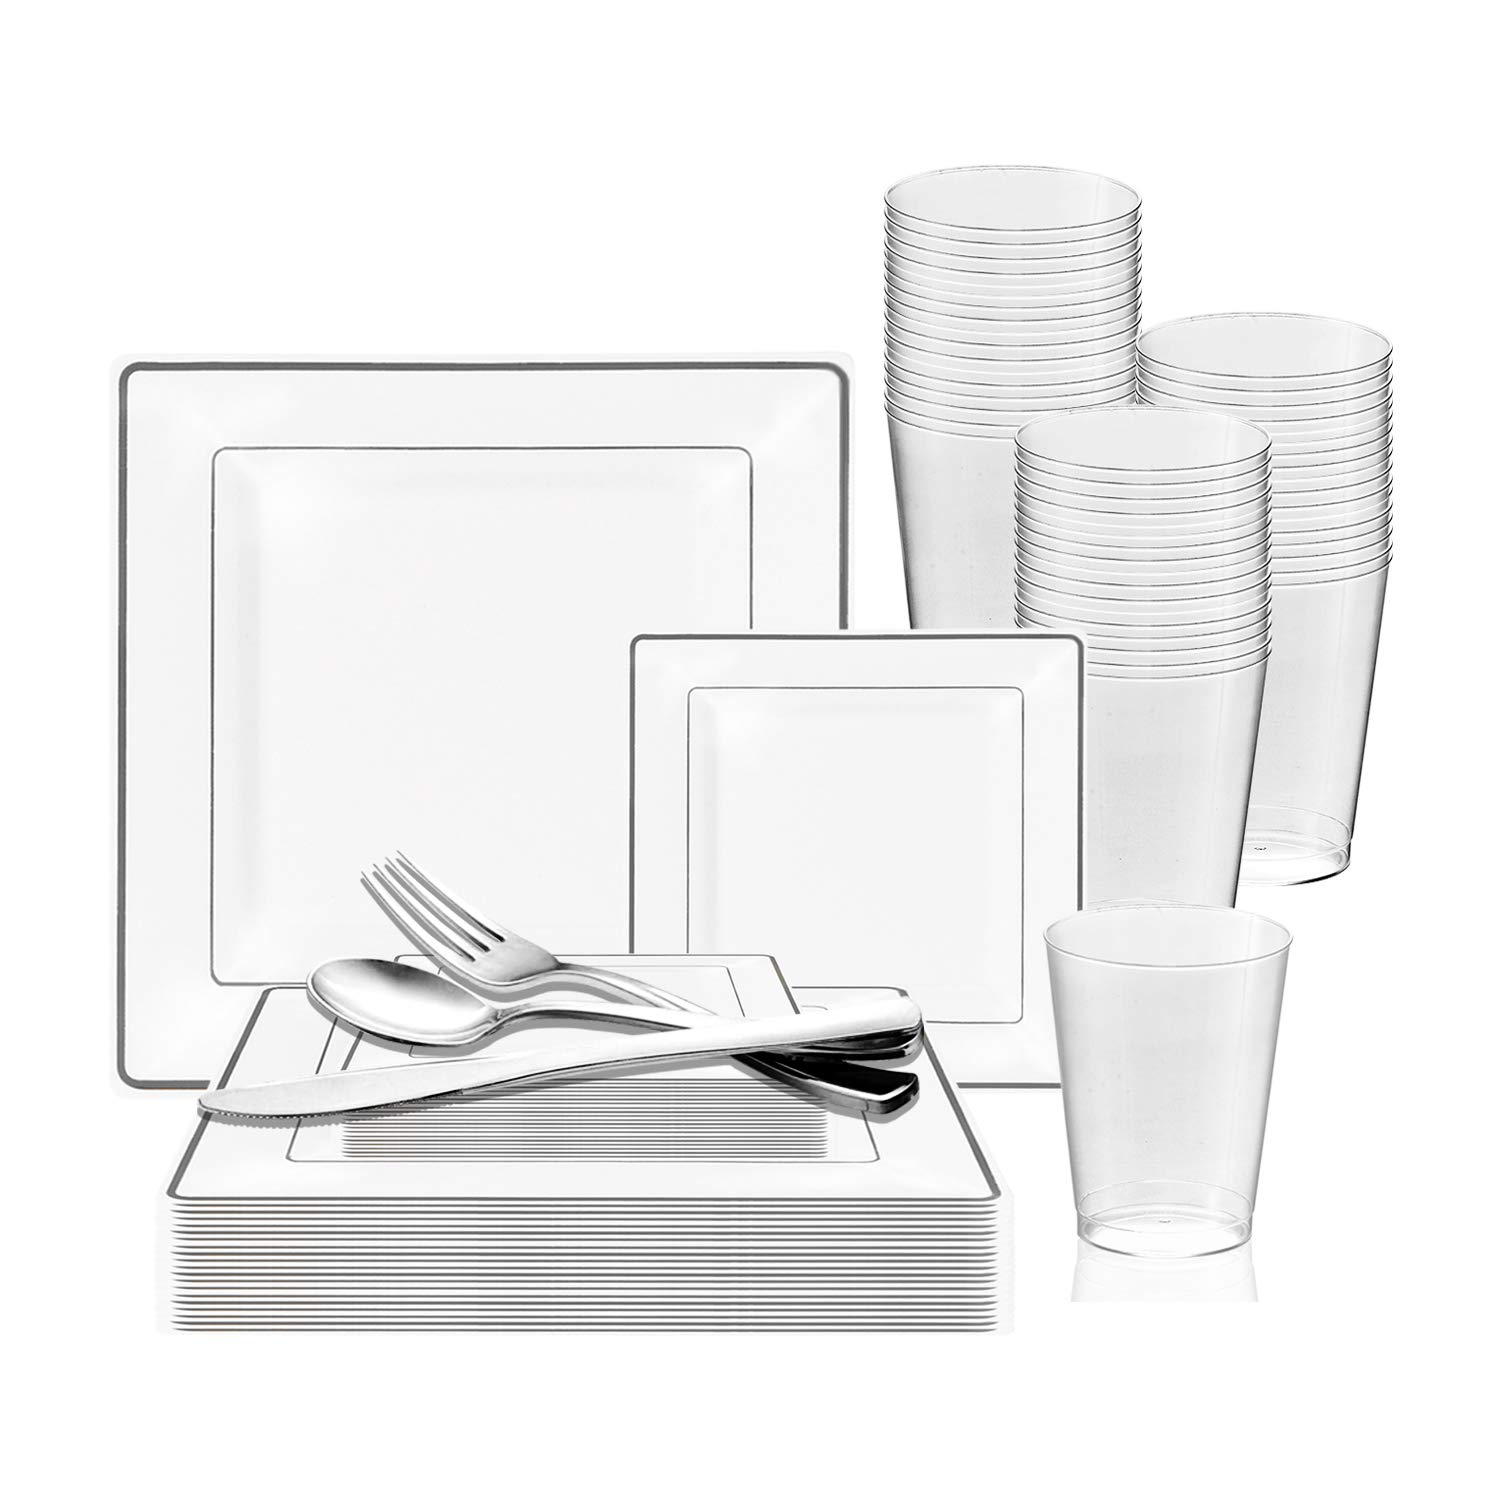 360 Piece Elegant Disposable Plastic Dinnerware Set for 60 Guests - Fancy Square White Silver-Rimmed Dinner Plates, Dessert Plates, Silverware Set ...